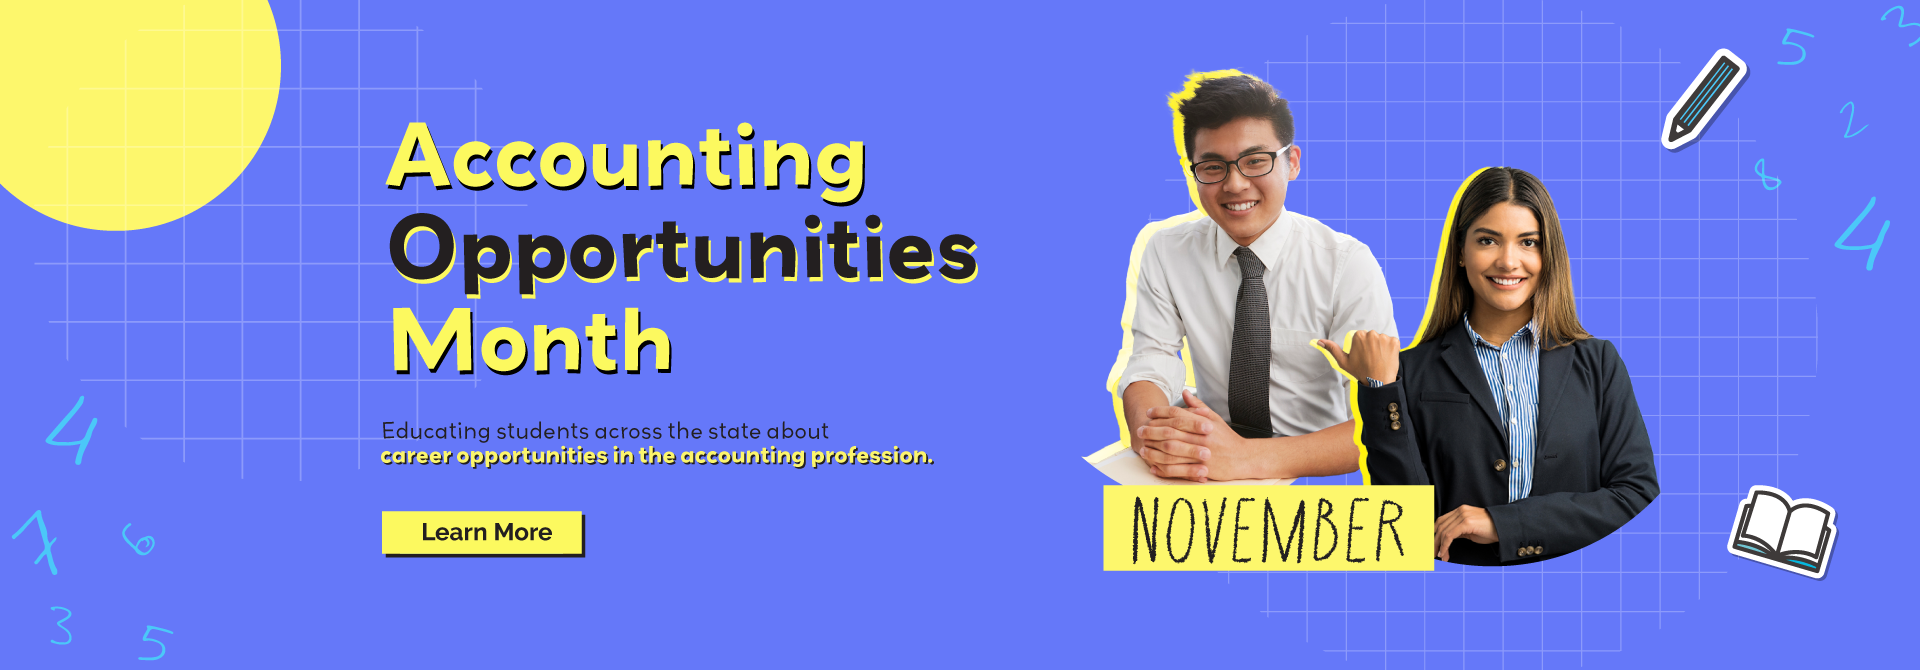 Accounting Opportunities Month